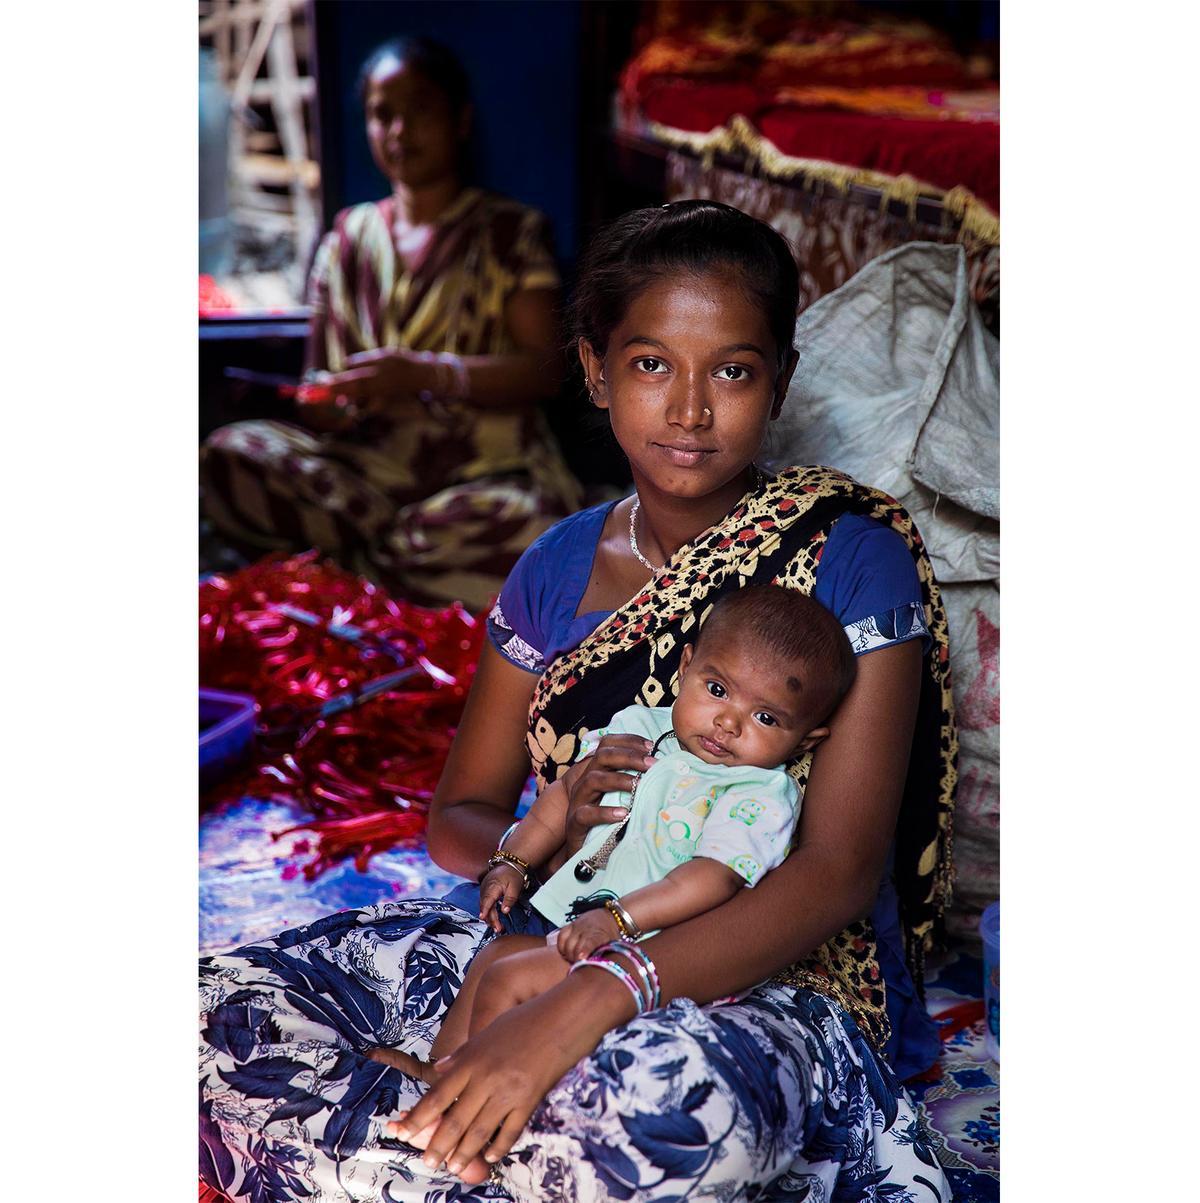 KOLKATA, INDIA, "Tabassum moved here from Bangladesh in hope of a better life for her daughter." (Courtesy of <a href="https://theatlasofbeauty.com/">Mihaela Noroc</a>)